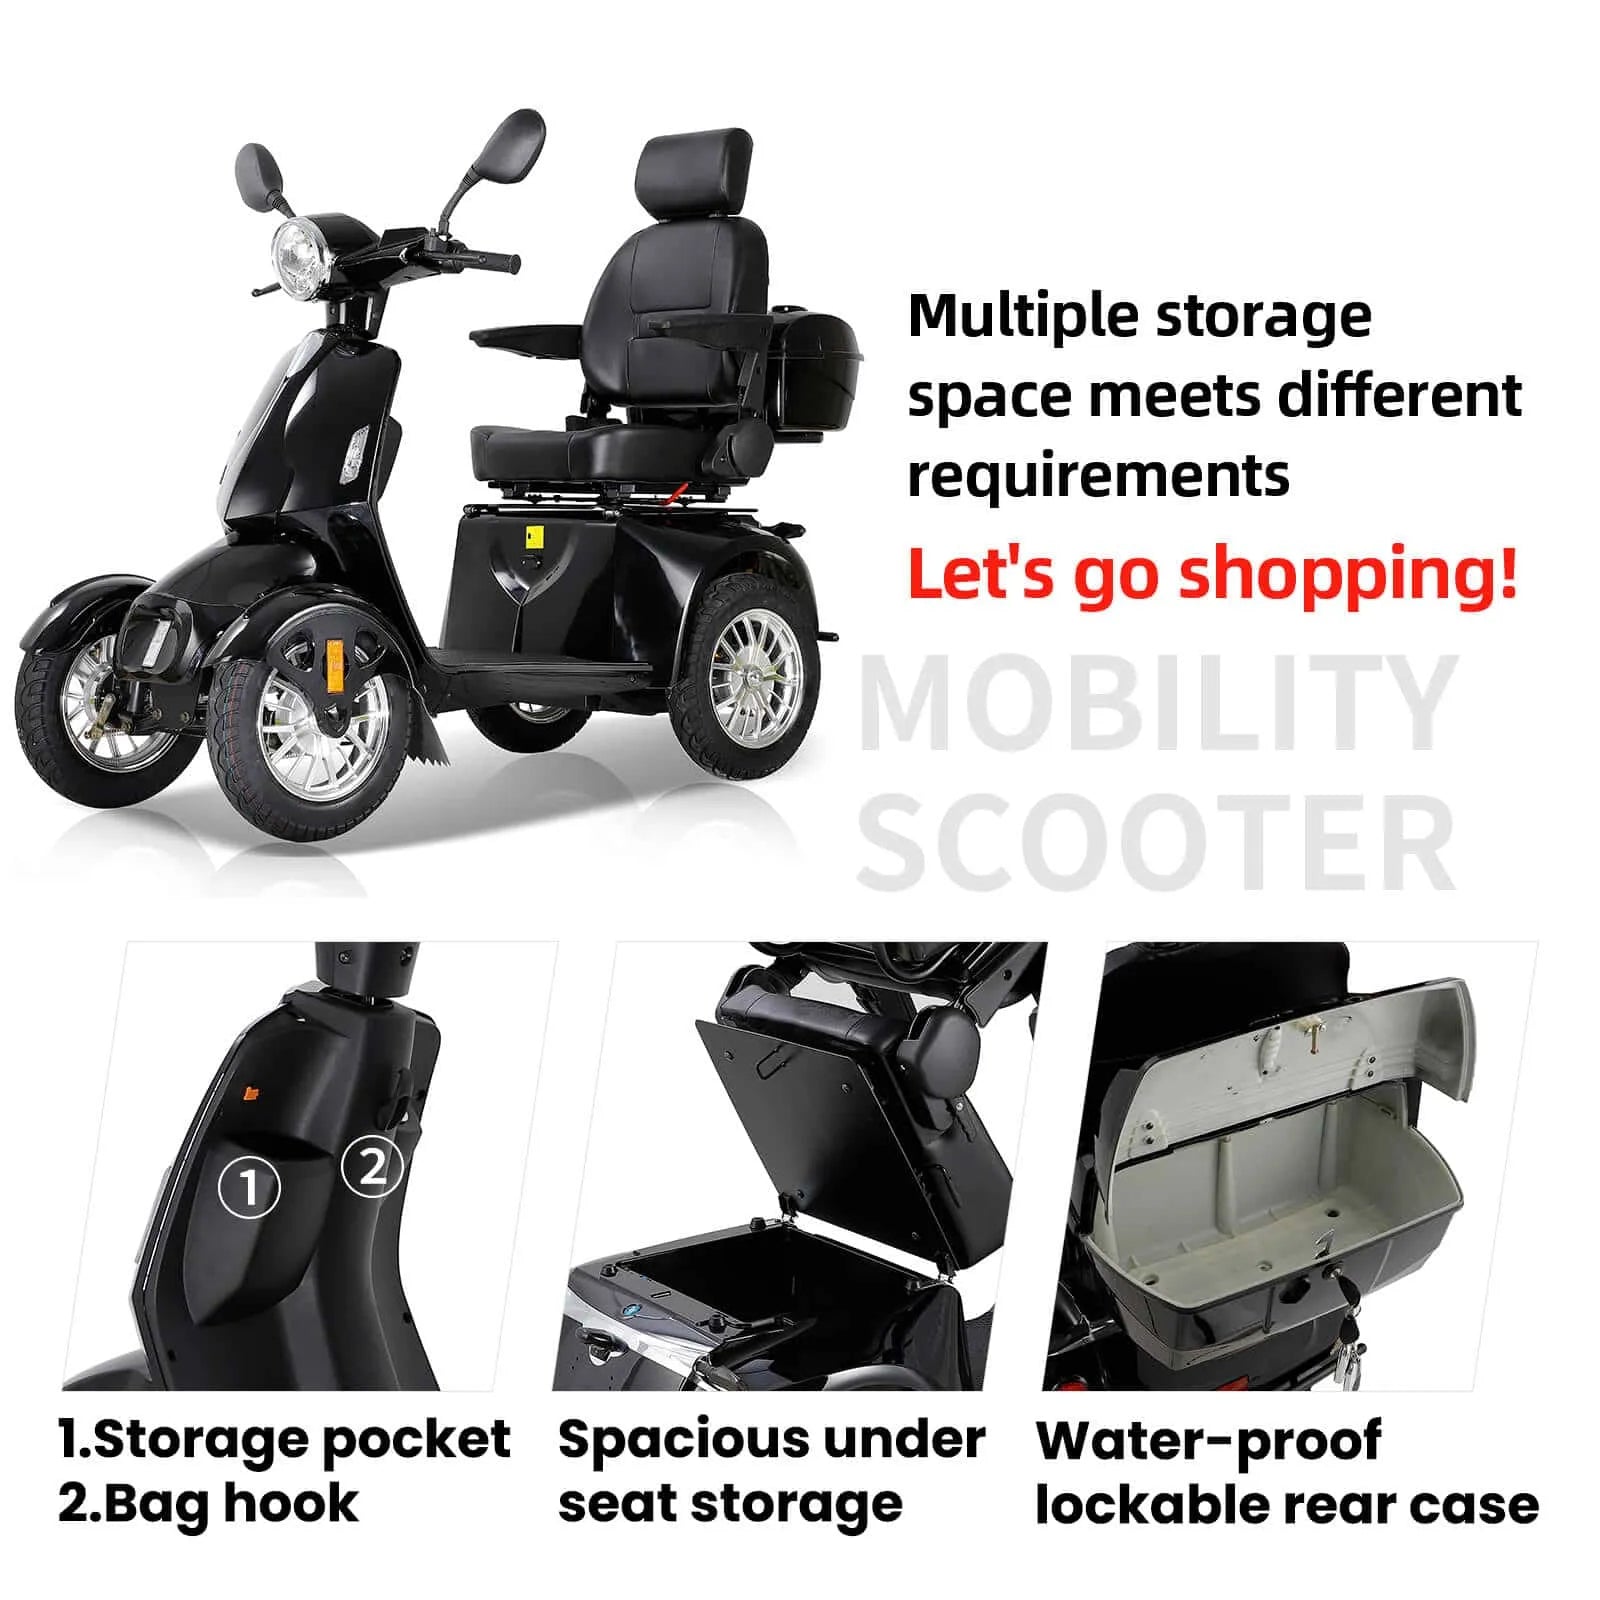 mobility scooter with multiple storage space